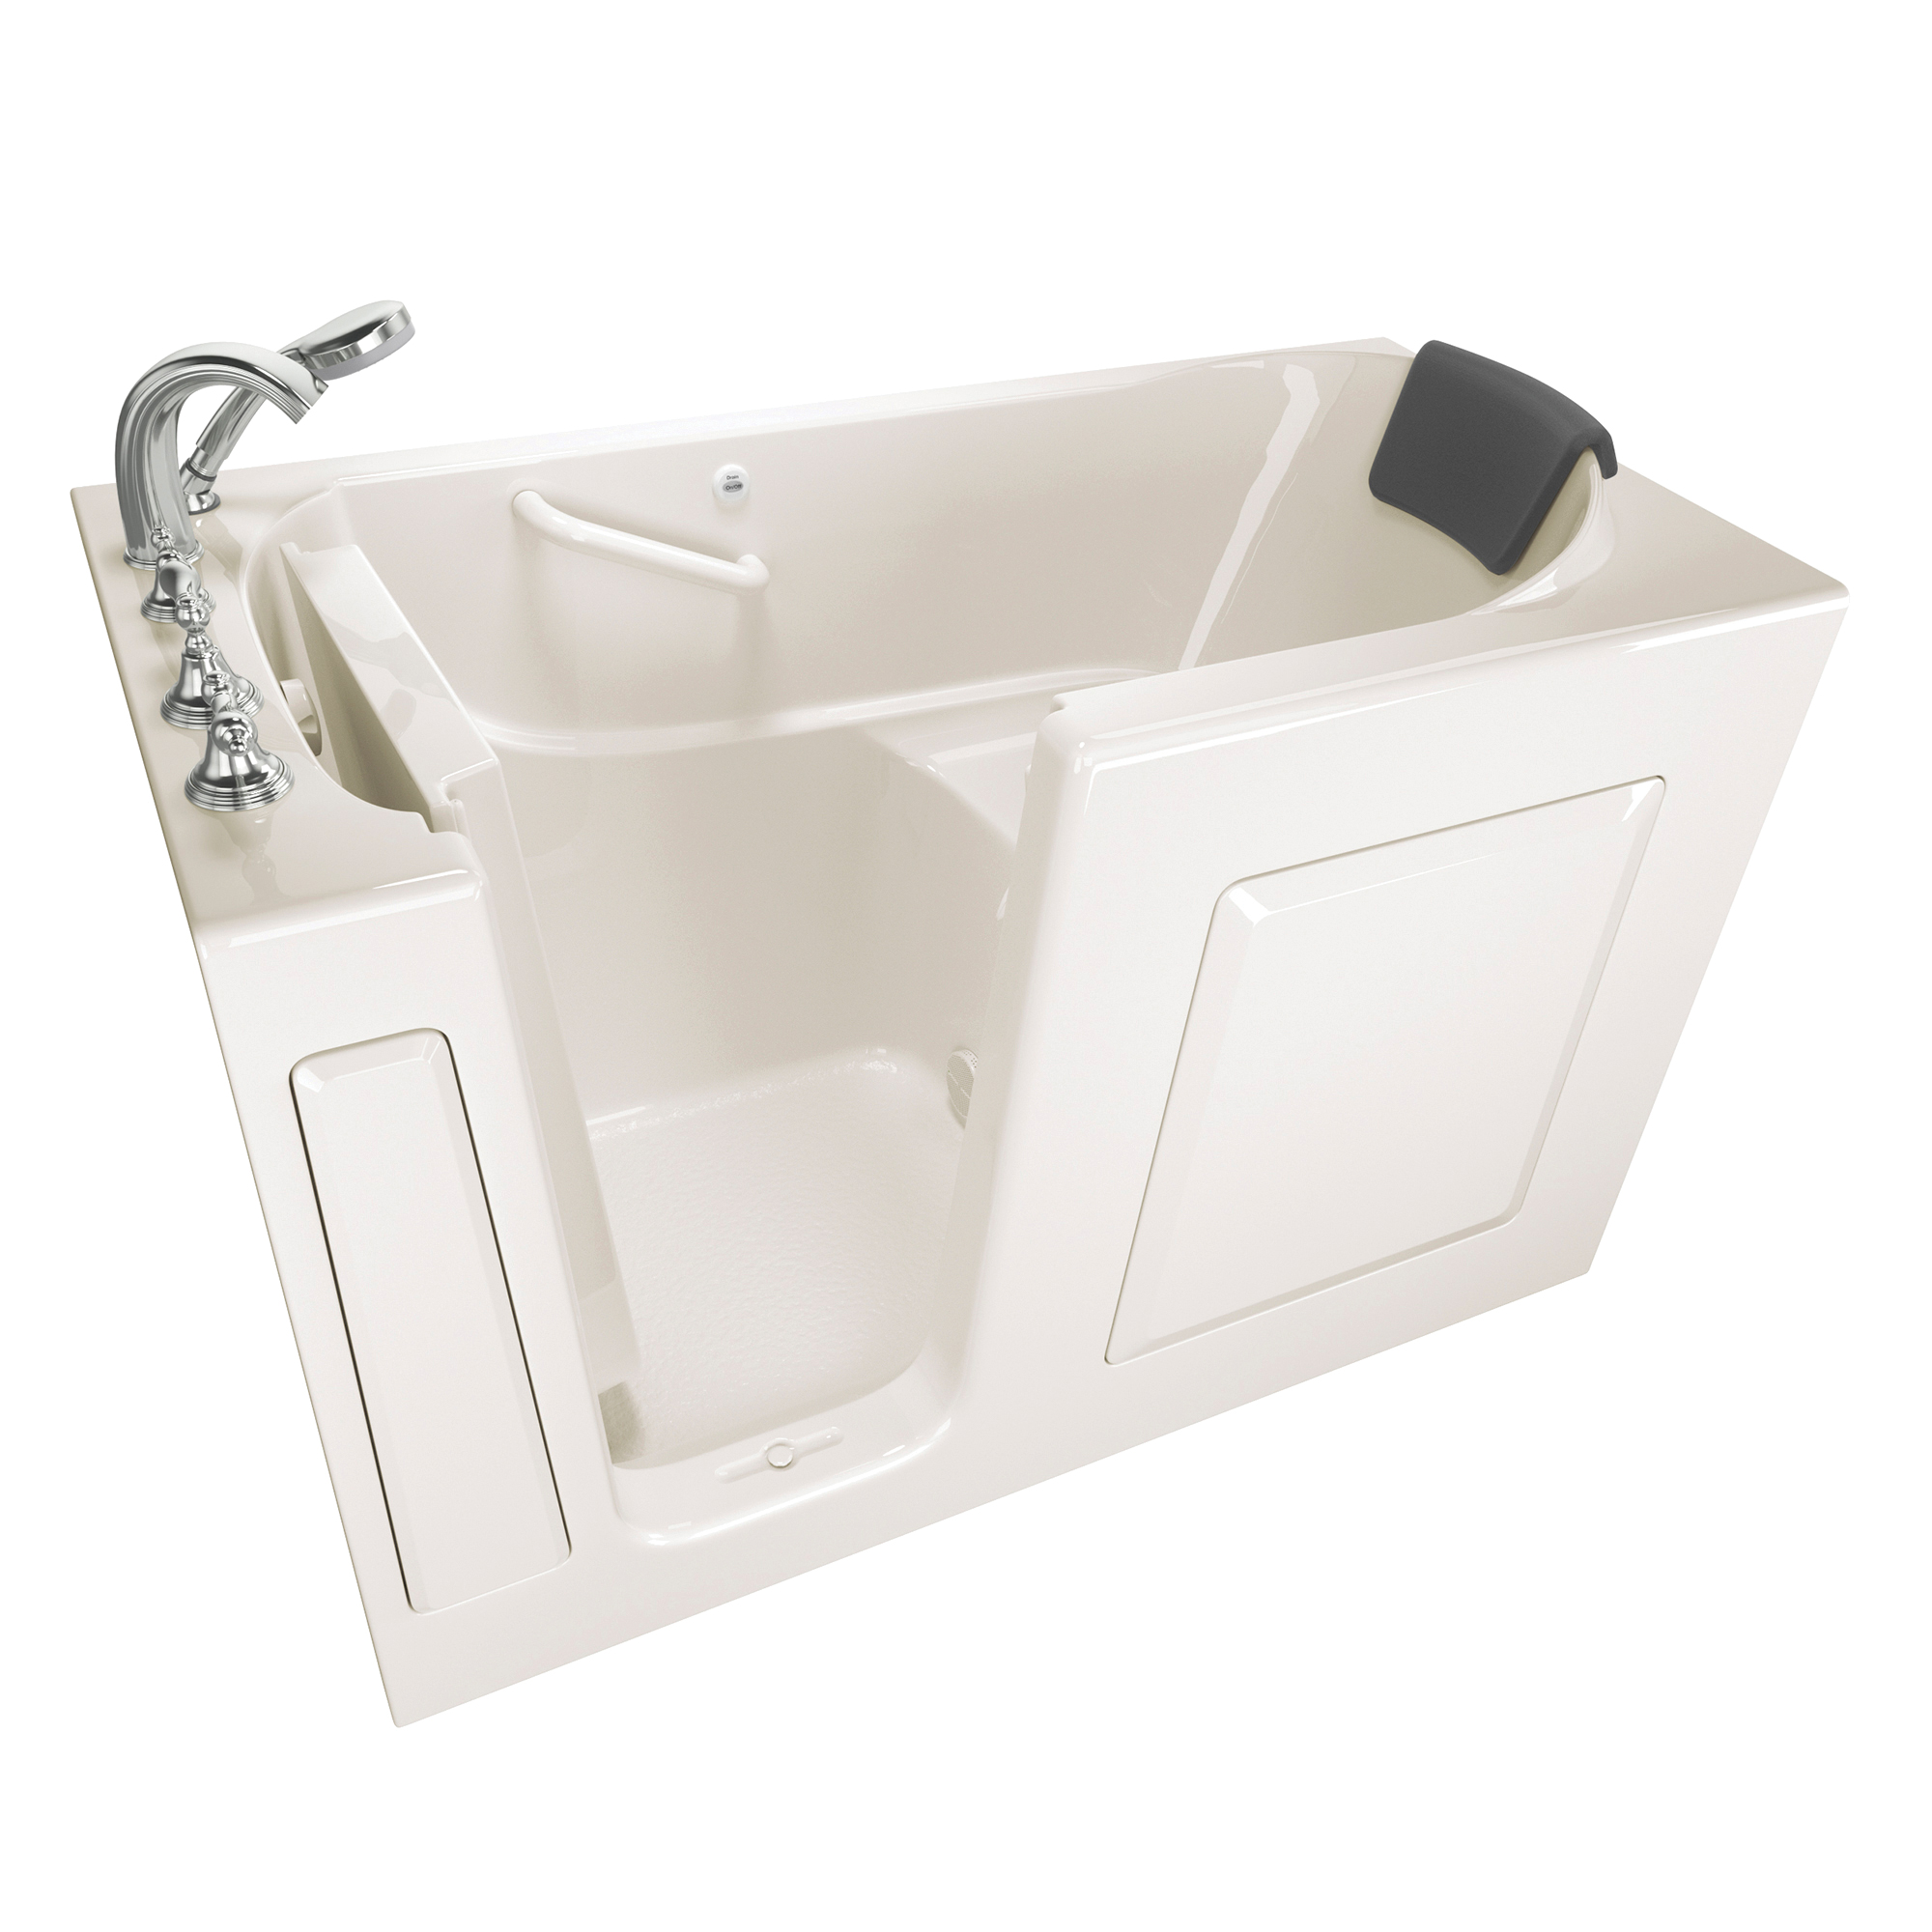 Gelcoat Premium Series 30 x 60 -Inch Walk-in Tub With Soaker System - Left-Hand Drain With Faucet